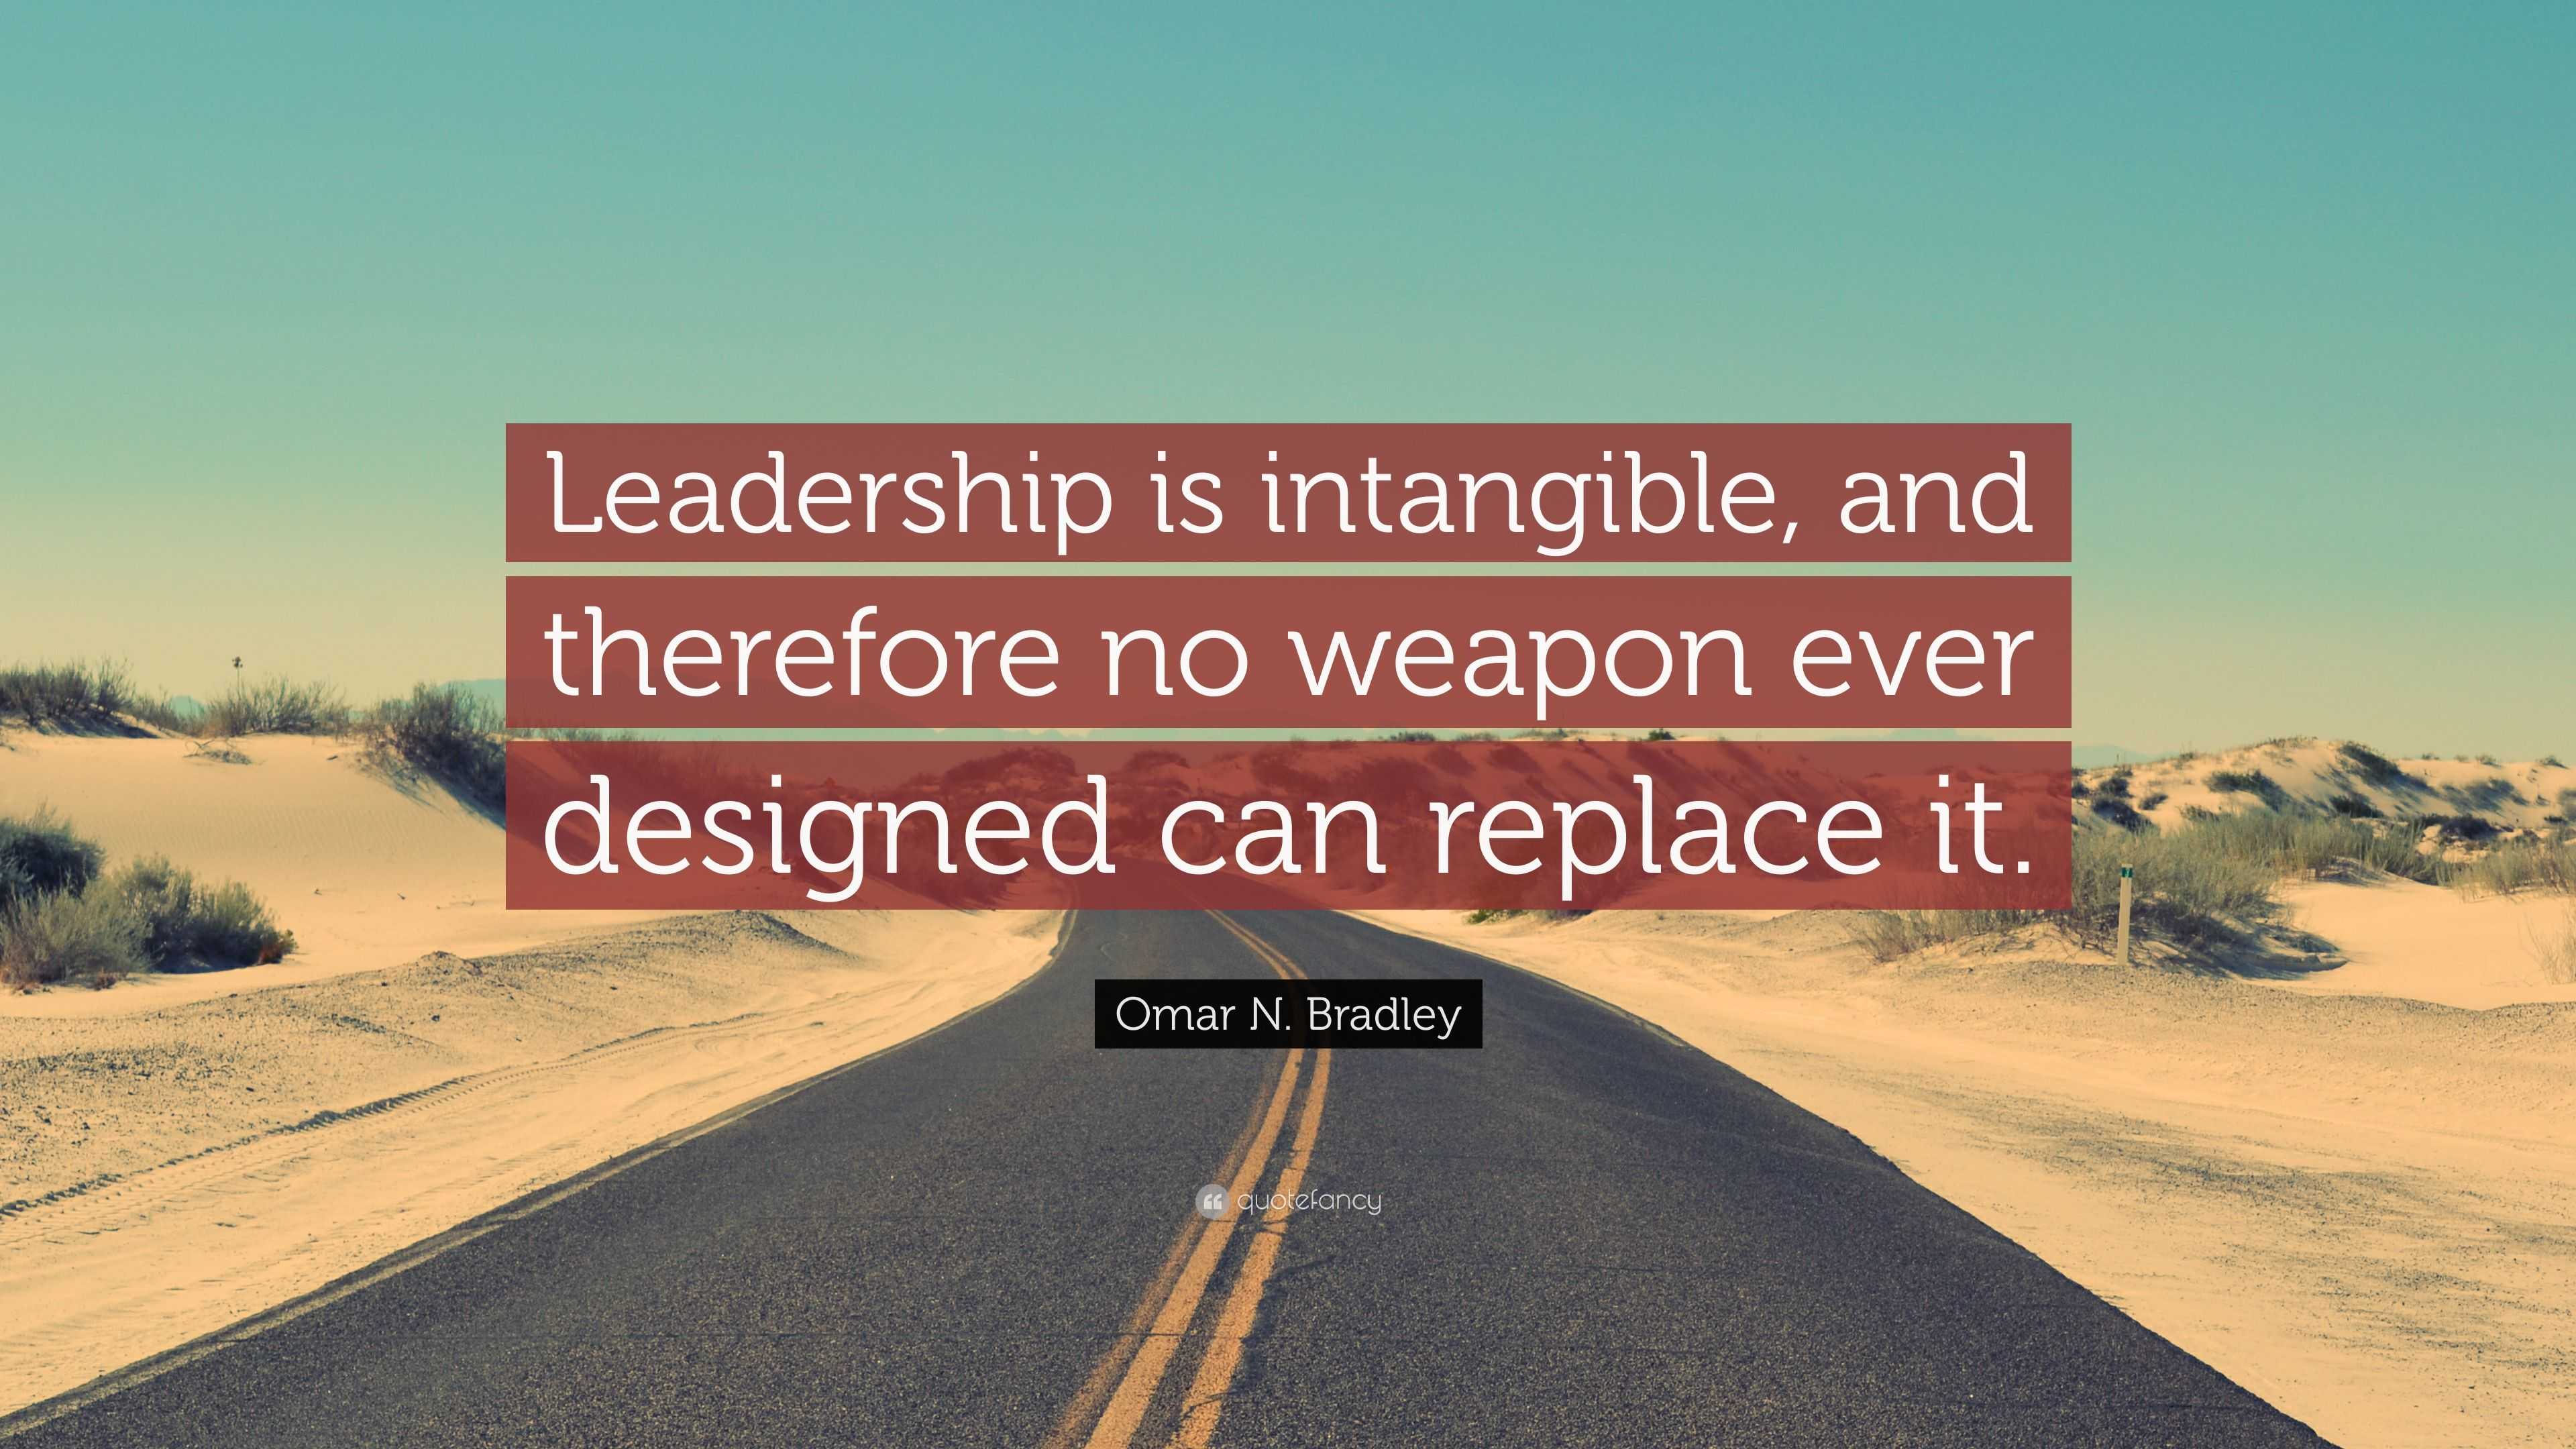 Omar N. Bradley Quote: “Leadership is intangible, and therefore no ...